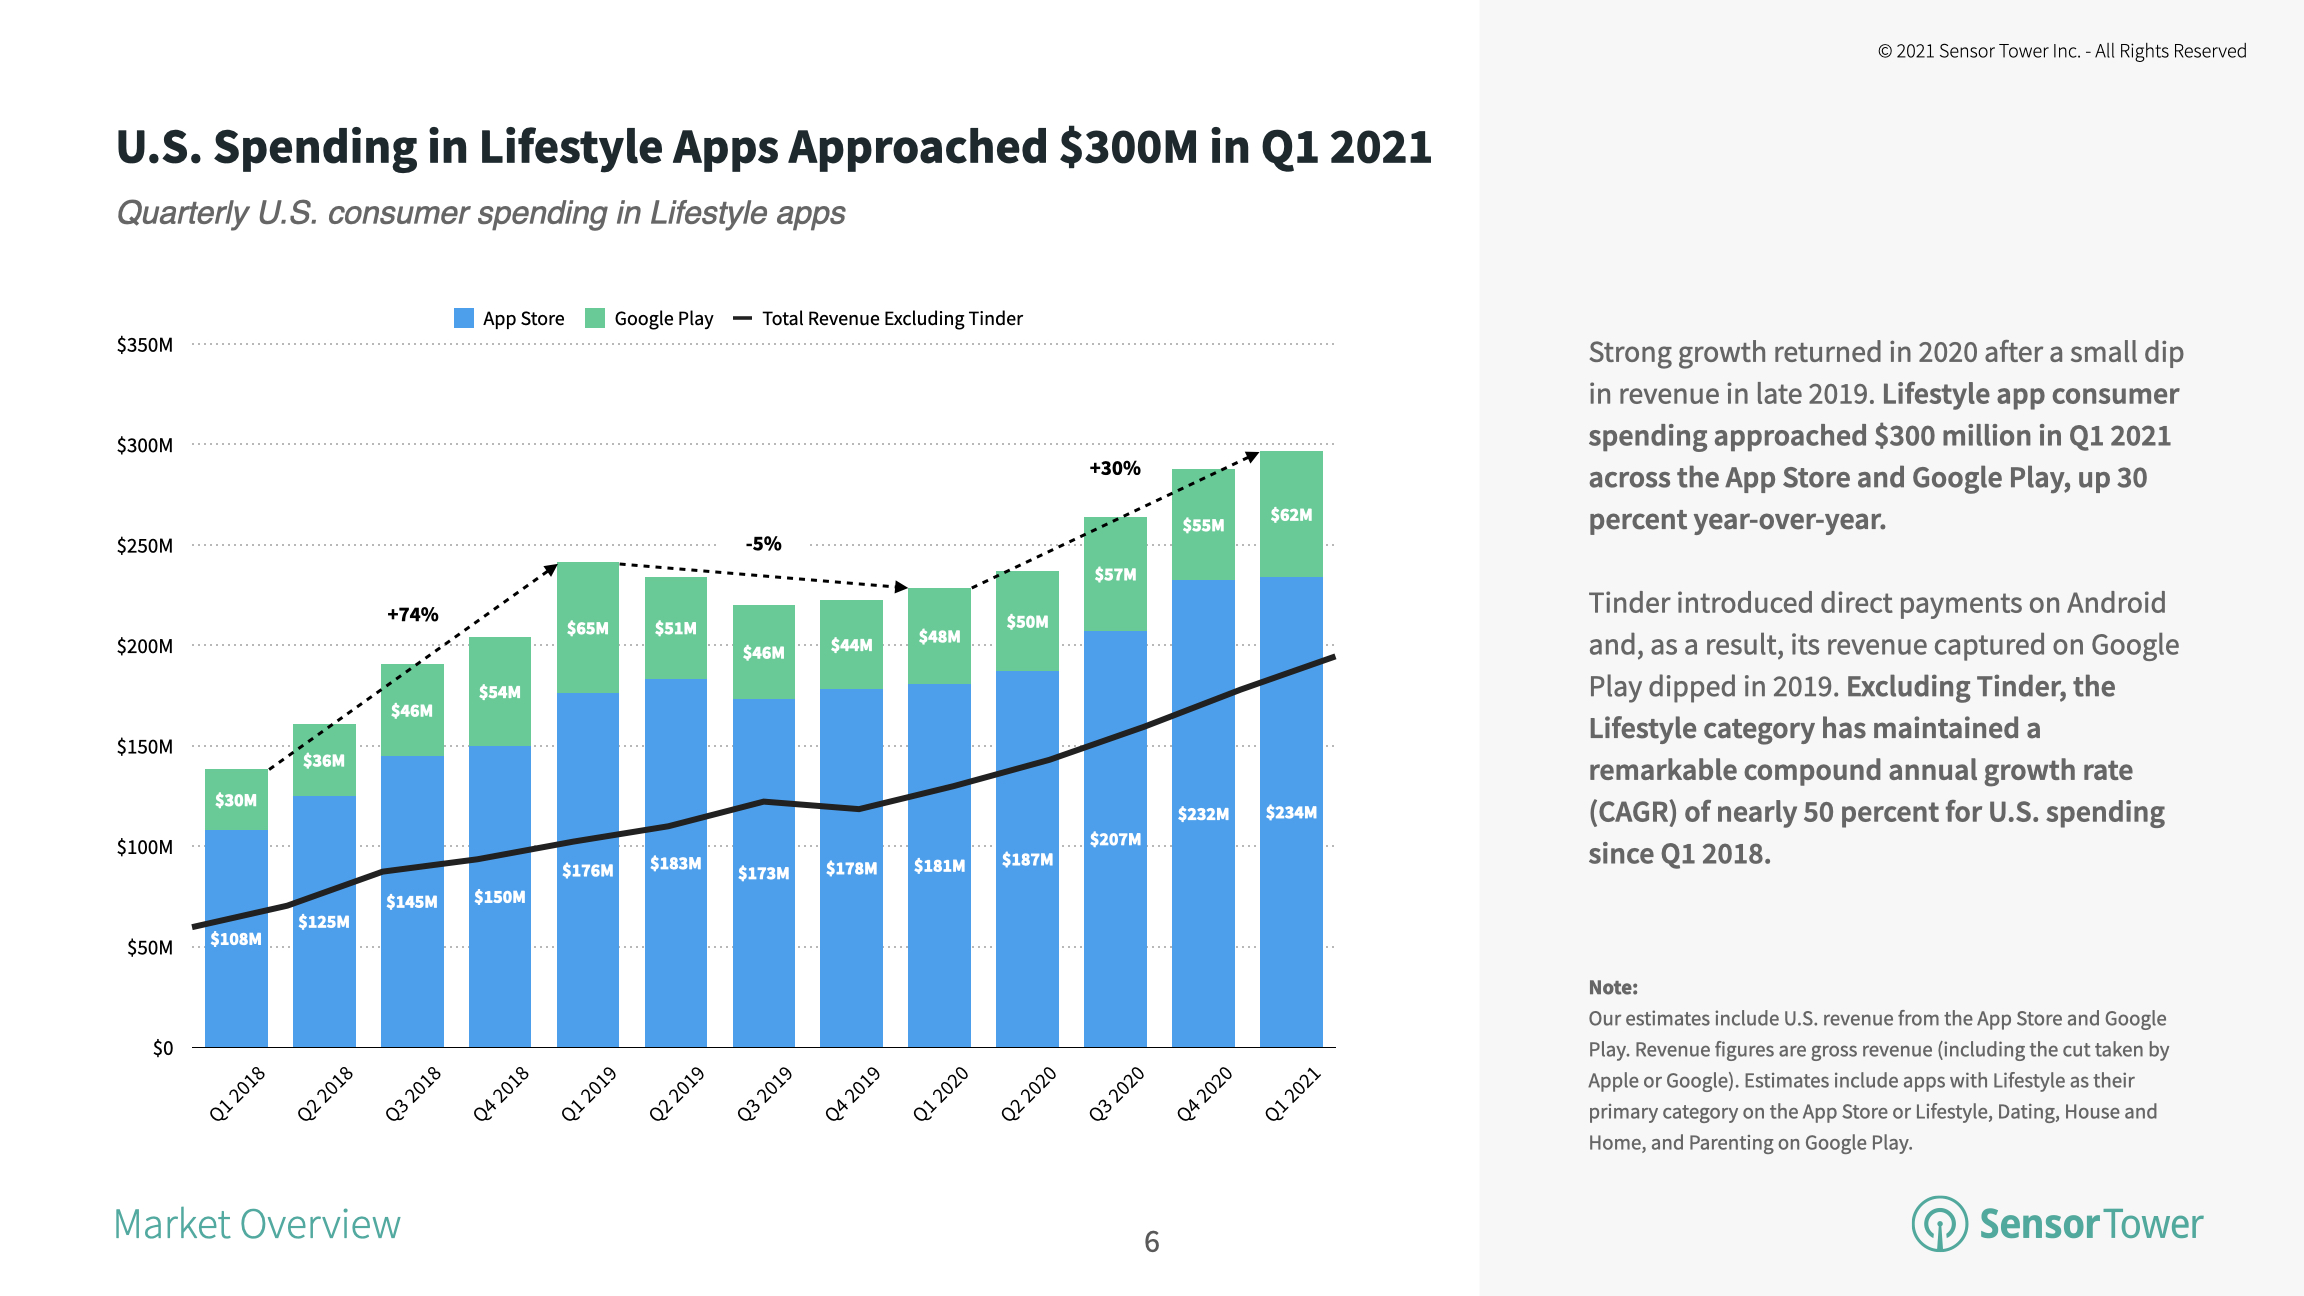 U.S. spending in Lifestyle apps reached nearly $300 million in Q1 2021.